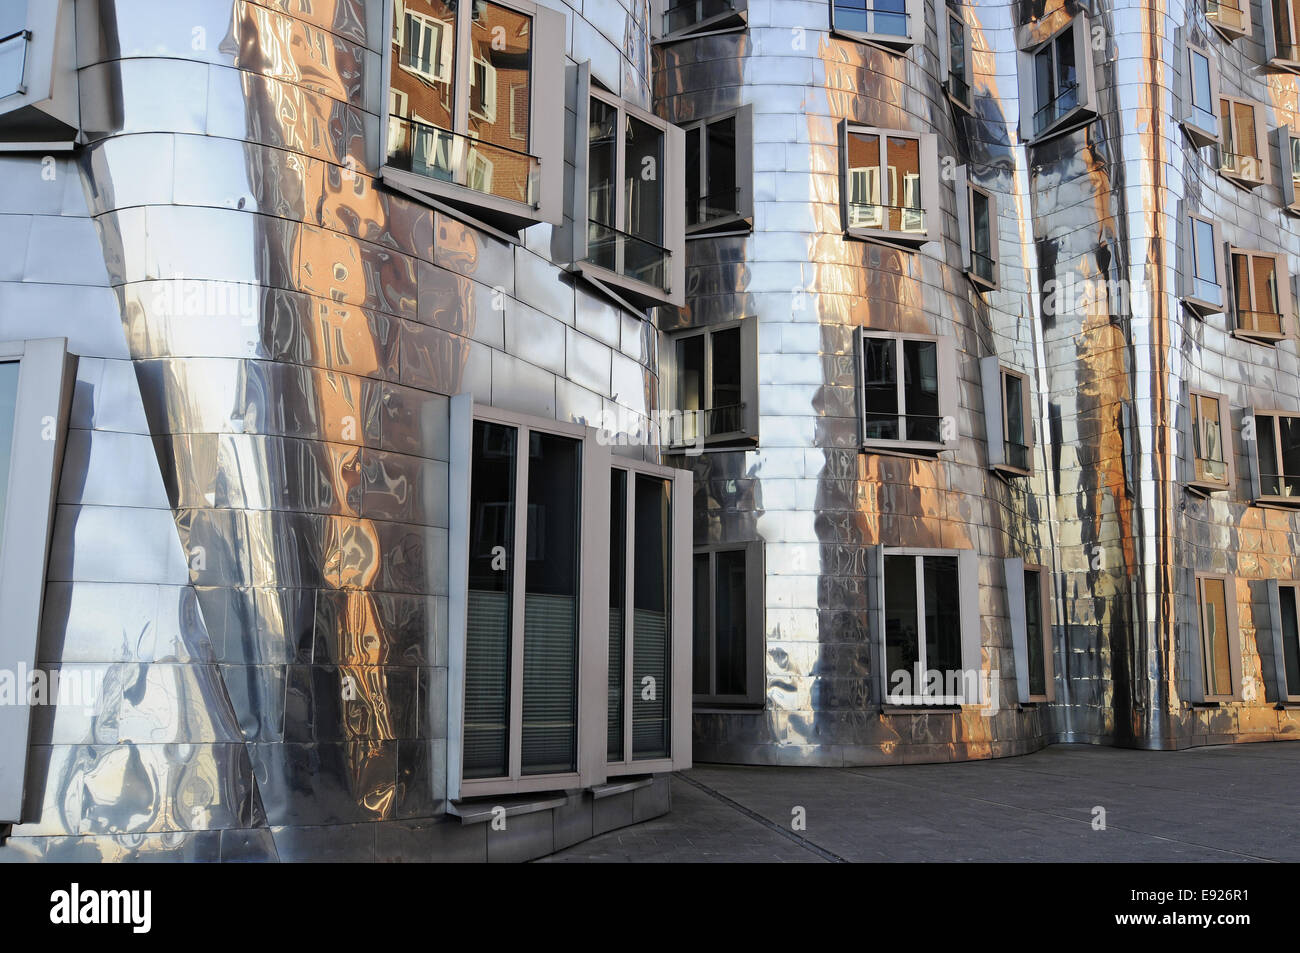 Neuer Zollhof building by architect Frank O. Gehry Stock Photo